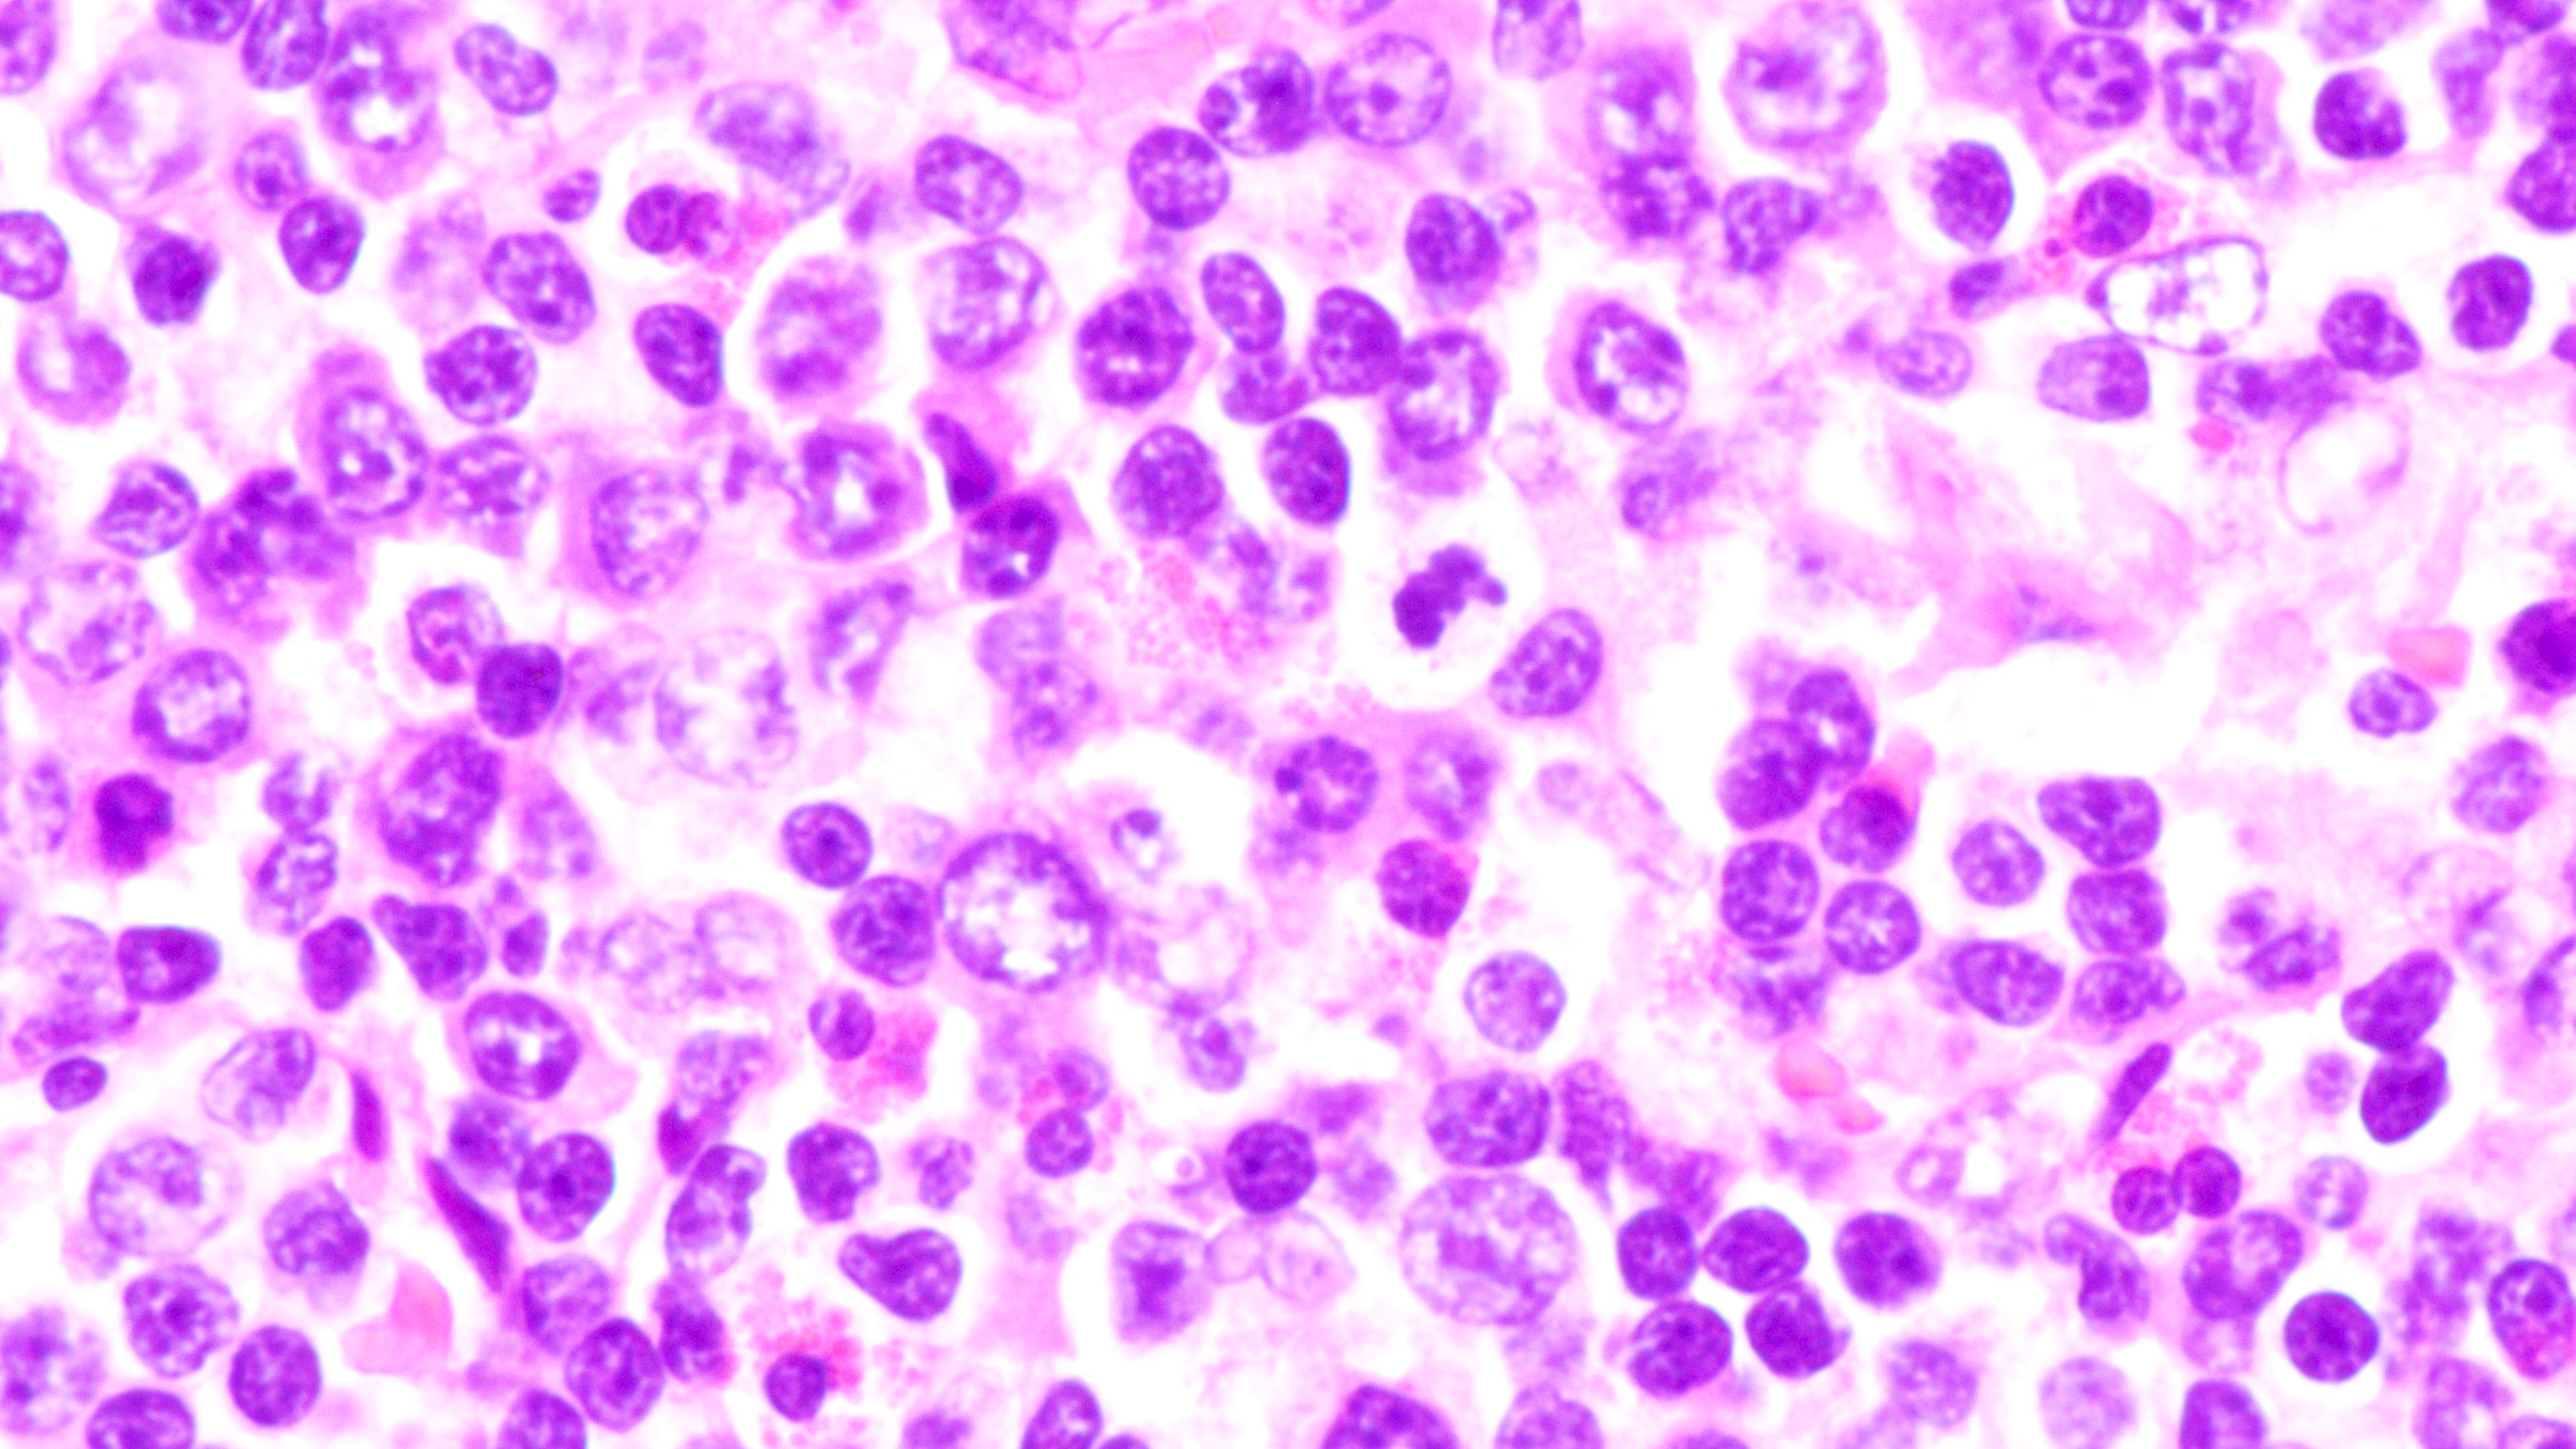 Composition of lymphoid infiltrate